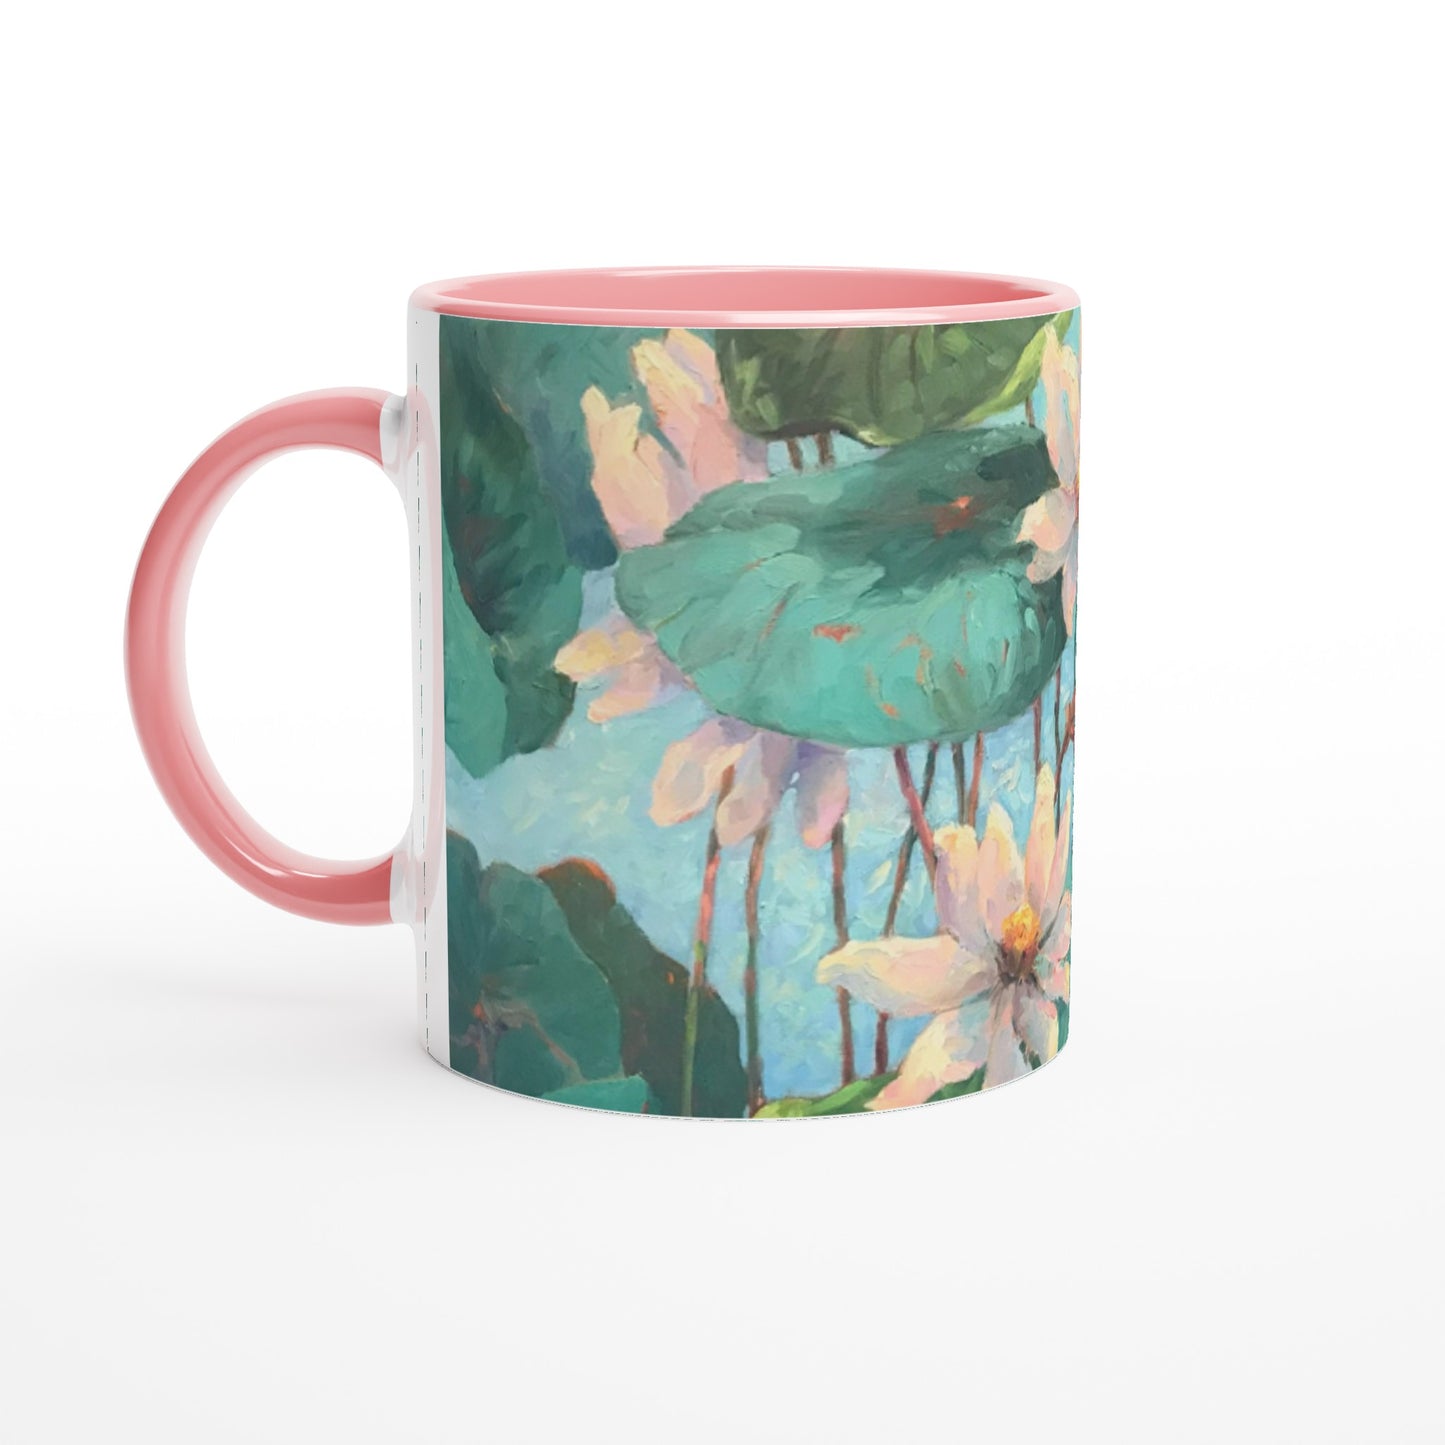 "Lily Pads" Floral White 11oz Ceramic Mug with Color Inside by Barbara Cleary Designs